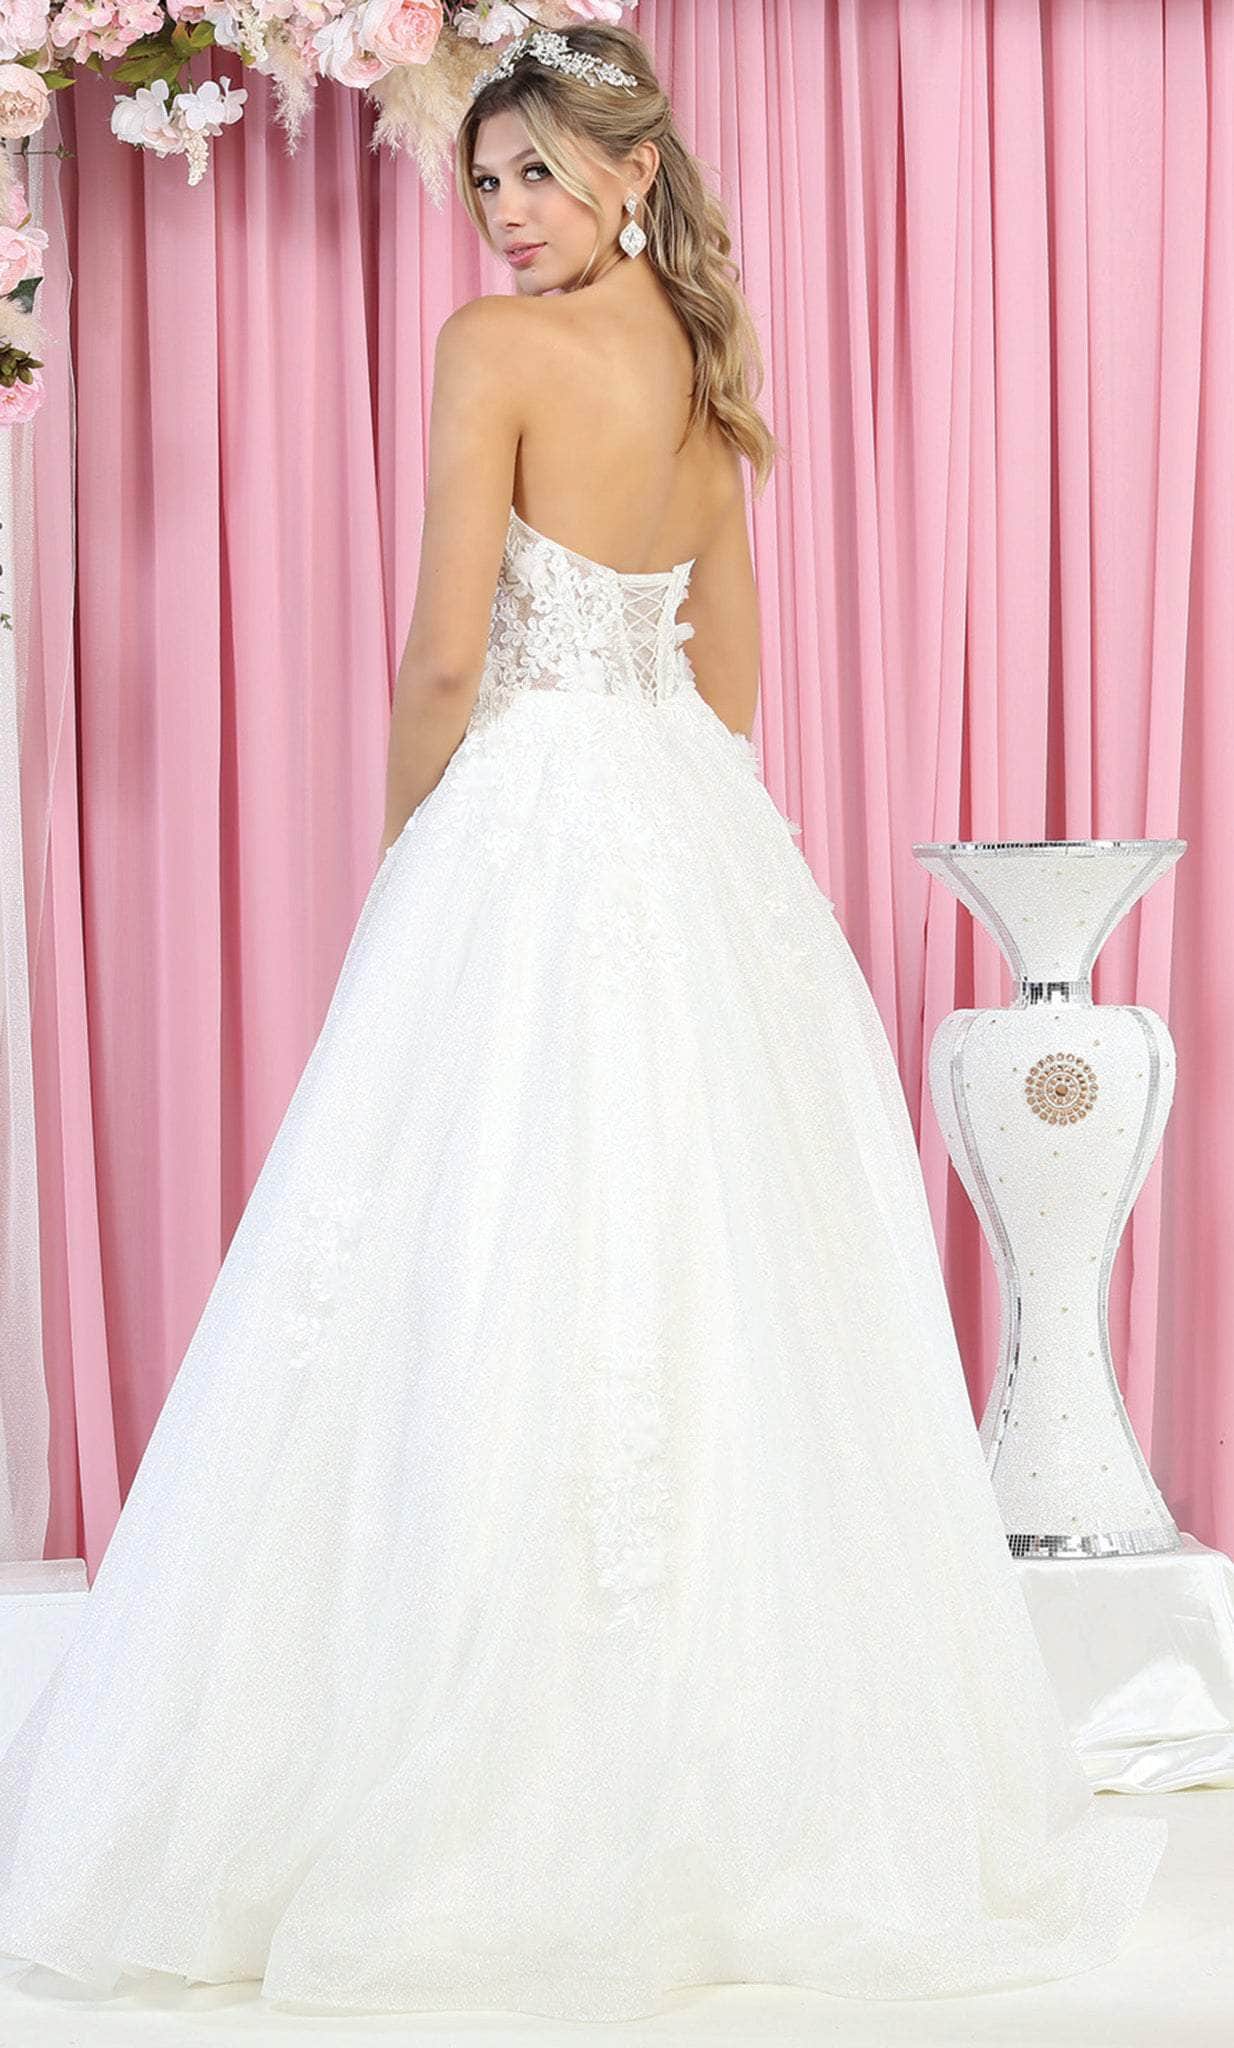 May Queen RQ7938 - Floral Strapless Bridal Dress Bridal Dresses